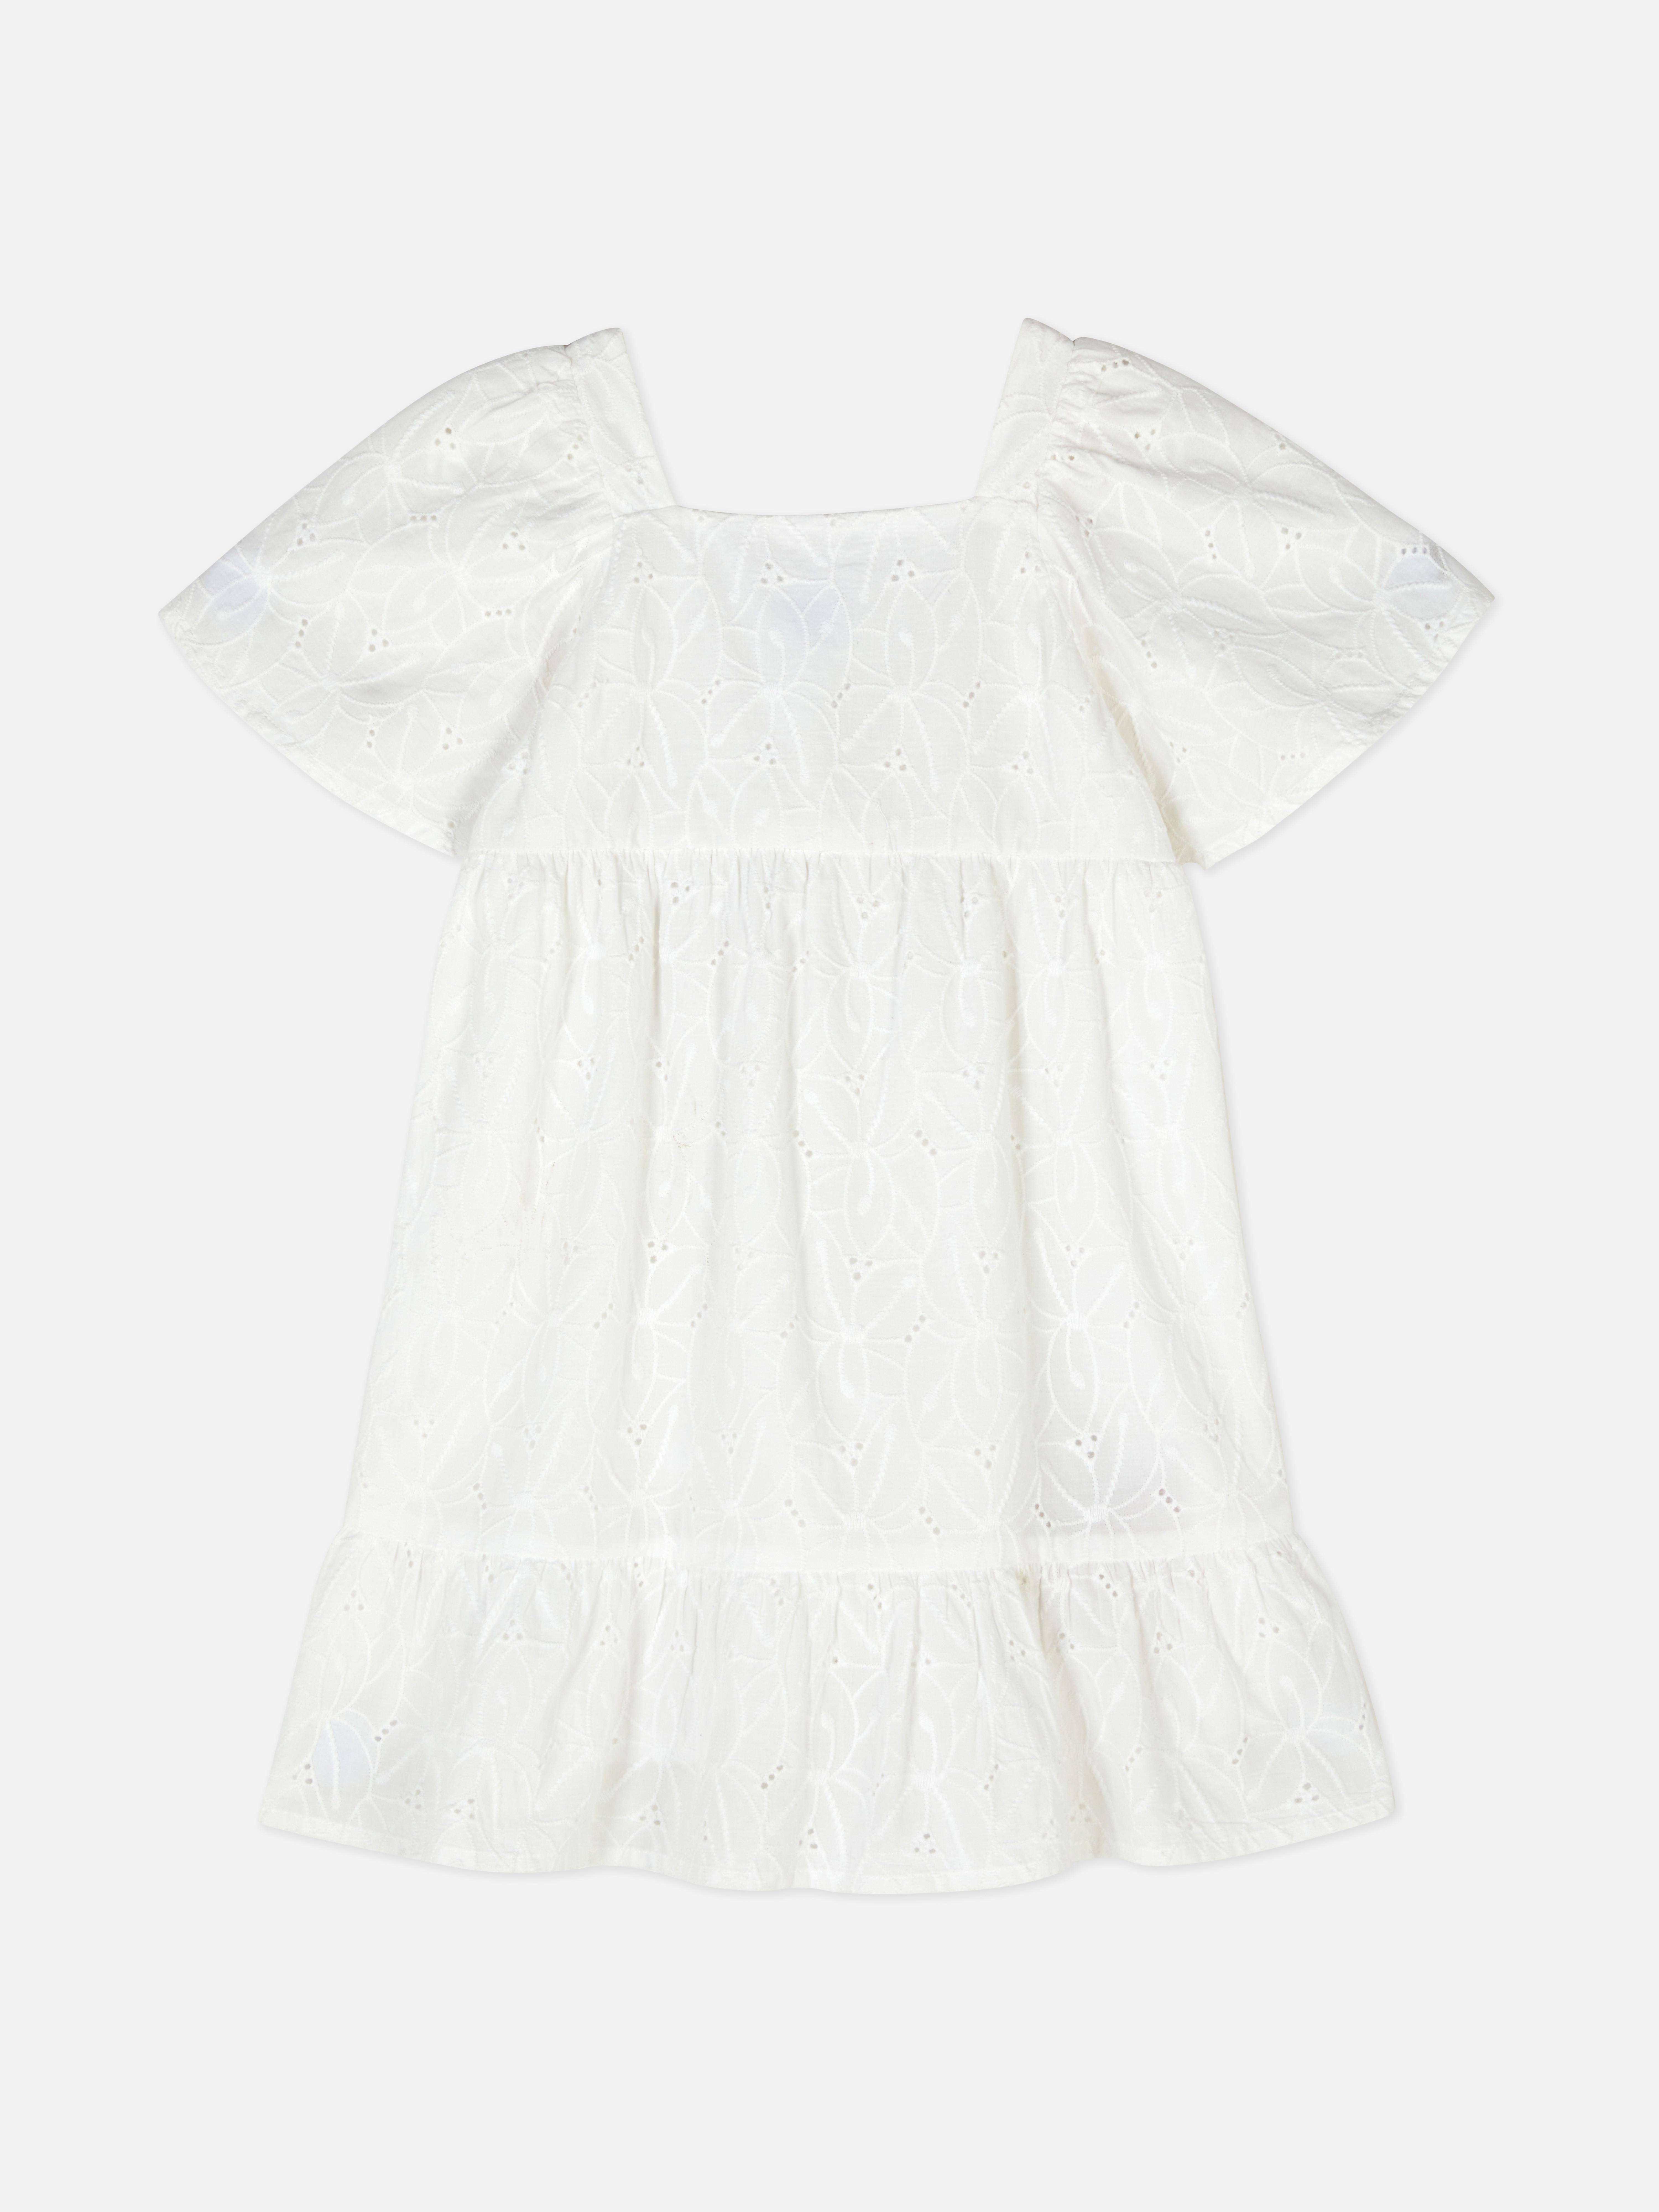 Robe à superpositions en broderie anglaise